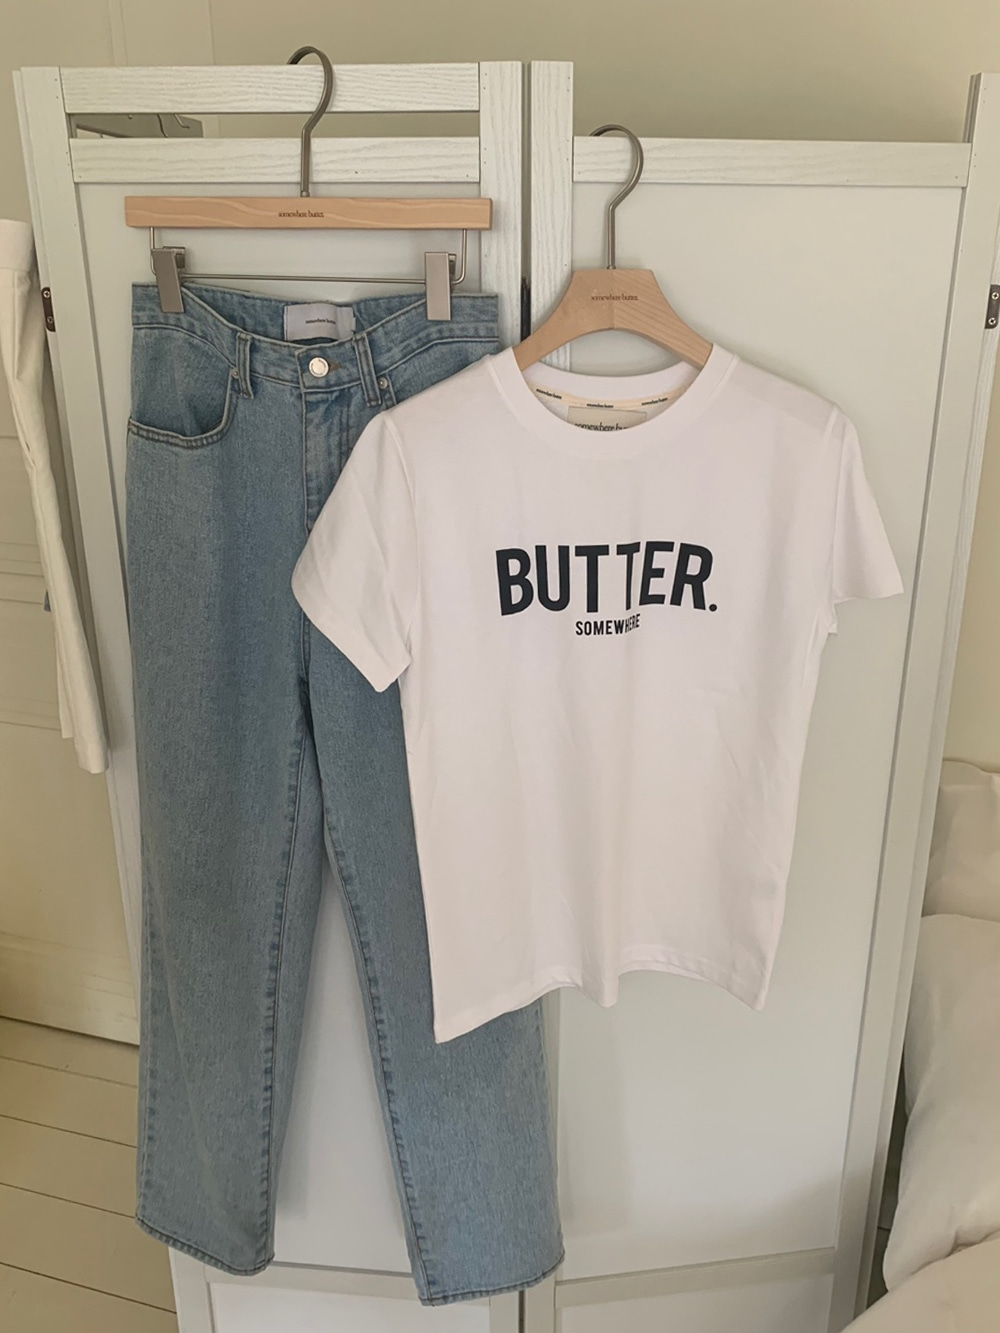 butter tee(standard fit) - ivory